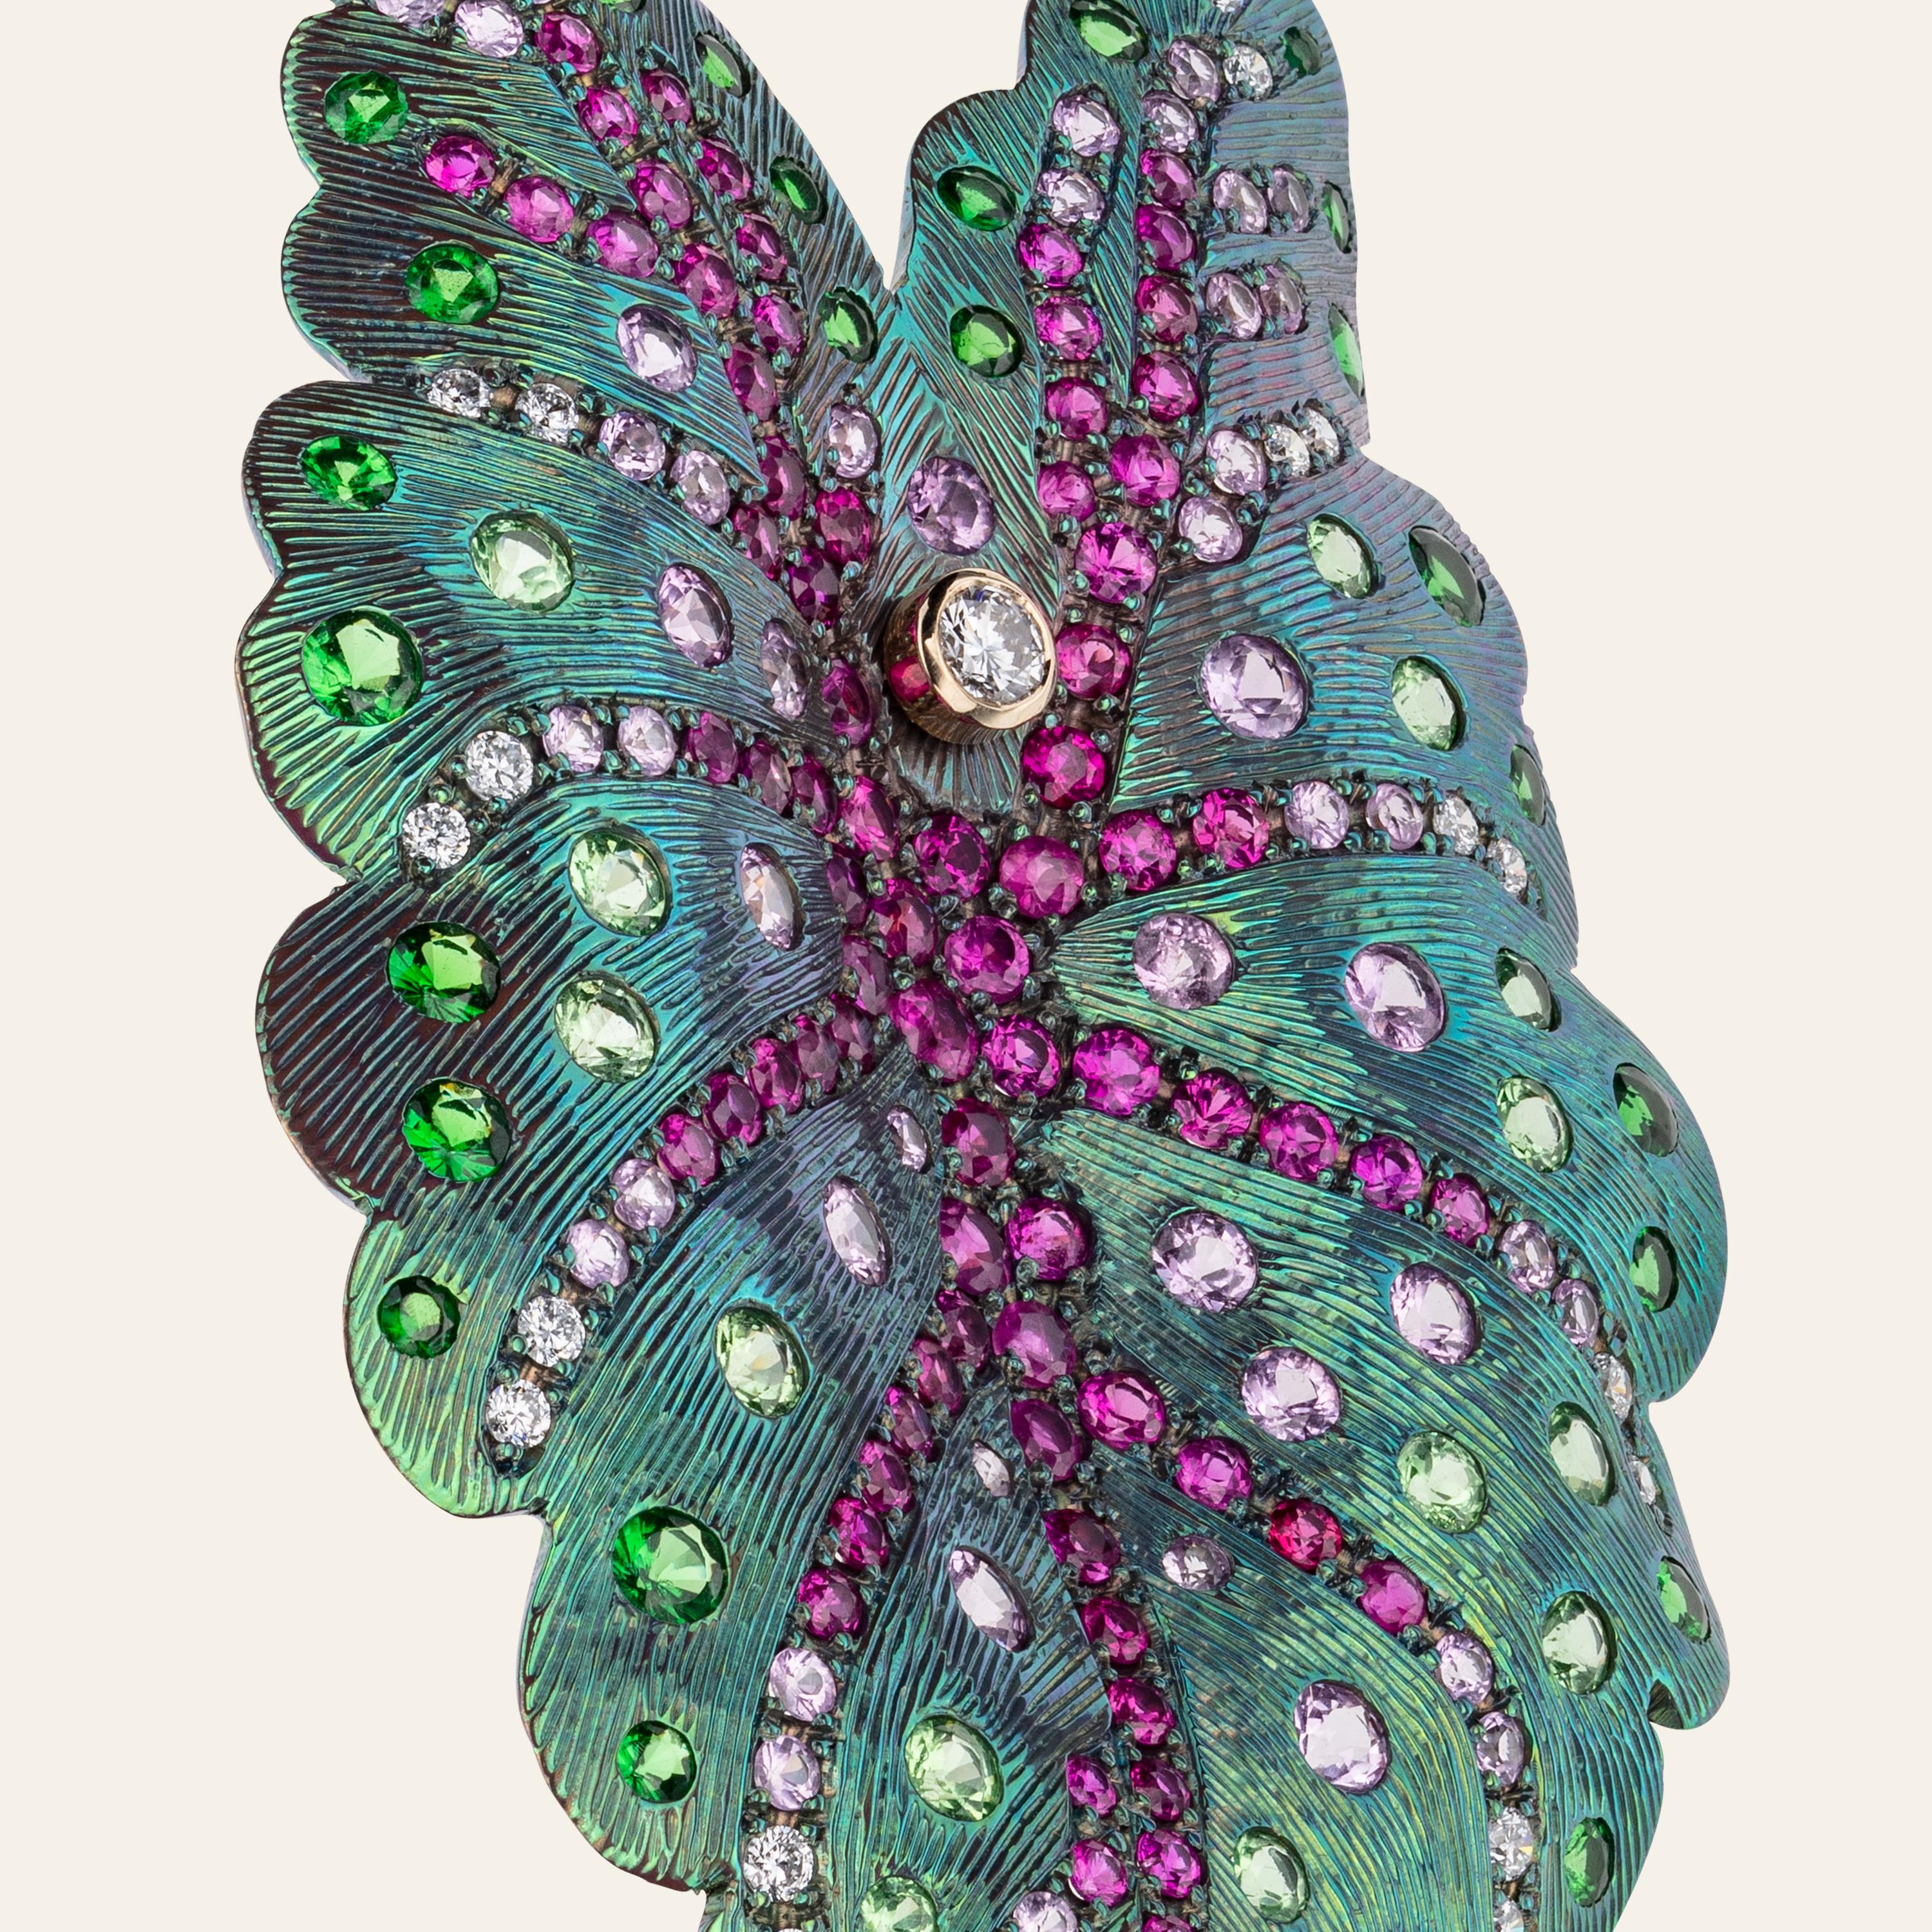 Sabbadini Jewelry Titanium Leaf Earrings
Titanium and 18k yellow gold leaf earrings, round cut diamonds 0,62 carats, pink sapphires 5,78 carats and green garnets 3,99 carats. 
Titanium 12grams; gold 4,72grams
Hand made jewelry & designed in Milan,